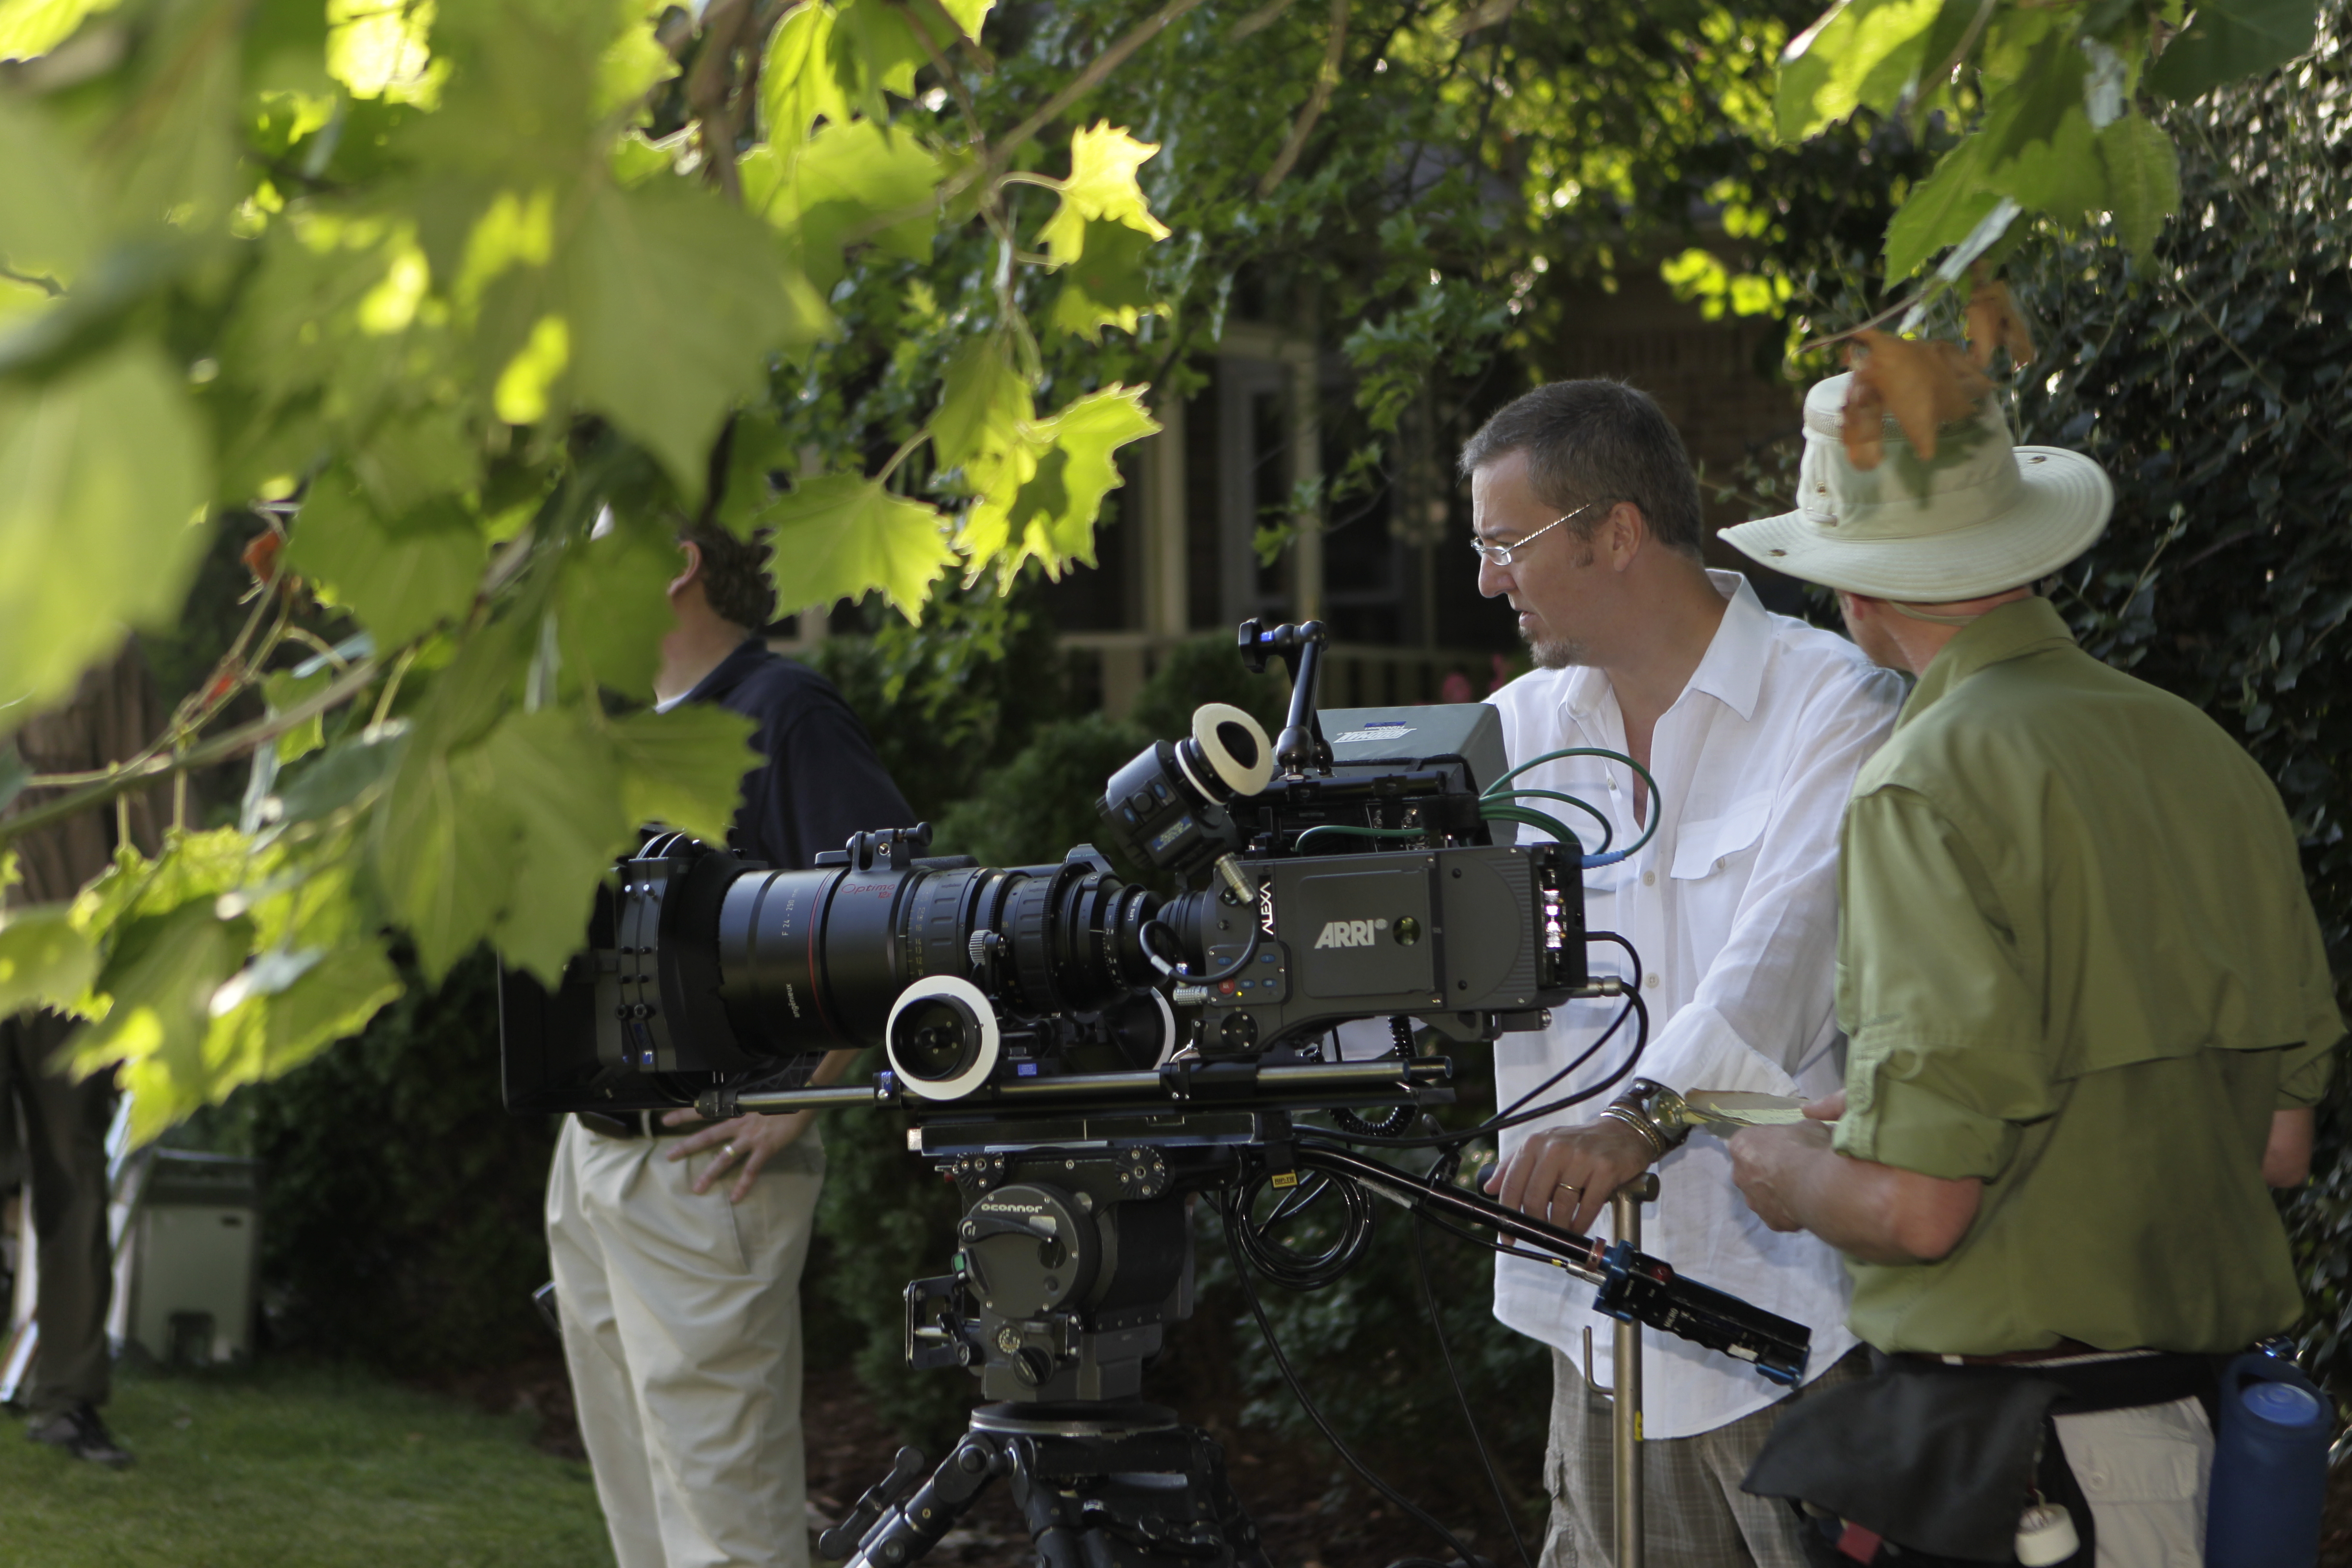 Doug Jefferson directing on location with AC and the Arri Alexa.